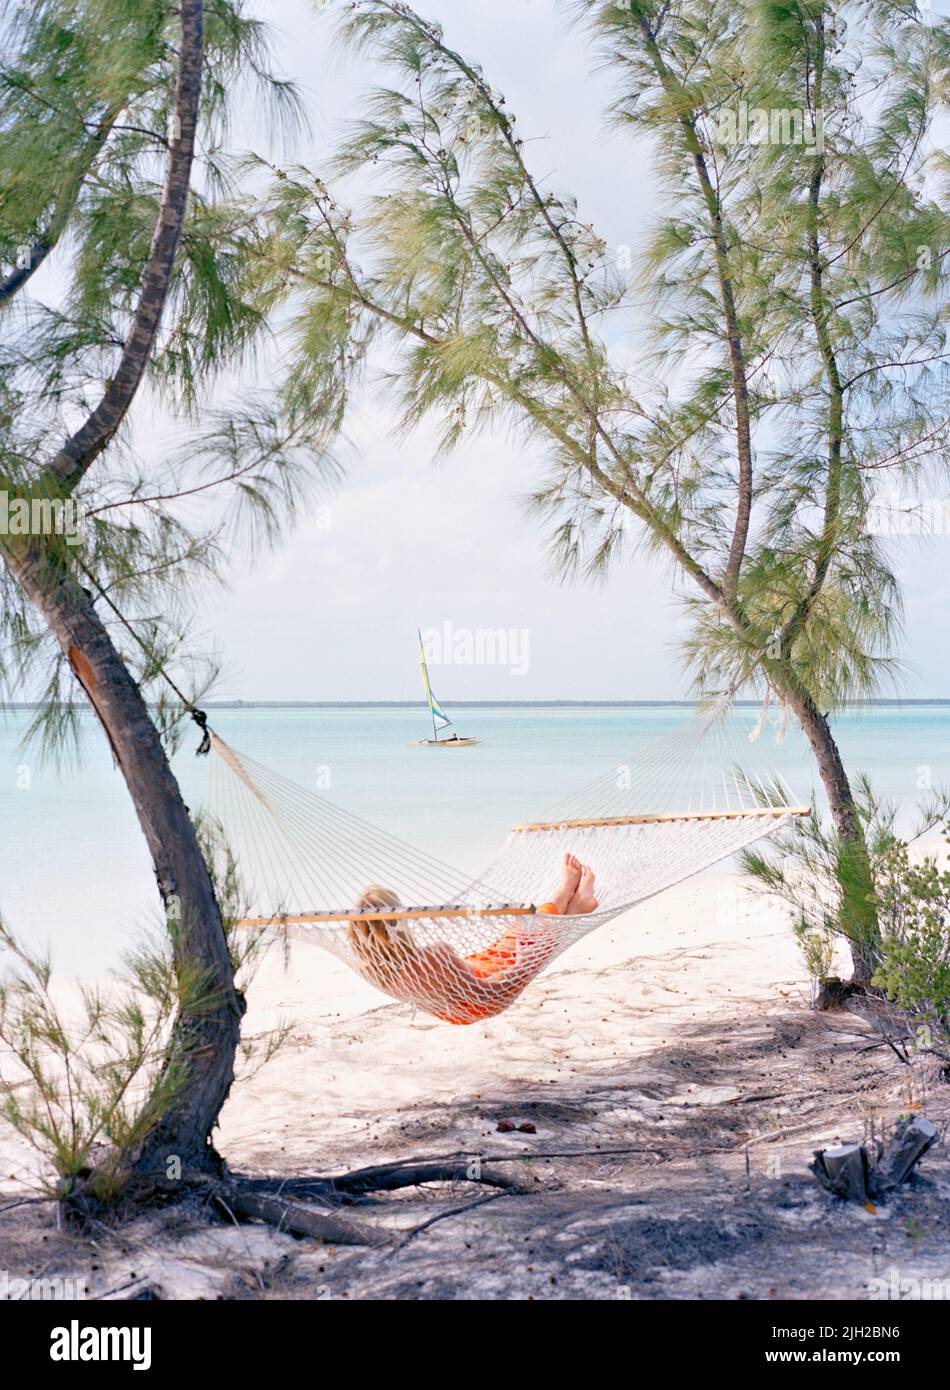 A guest relaxes in a hammock on Tiamo Beach as a catamaran sails by. South Andros Island, Bahamas Stock Photo